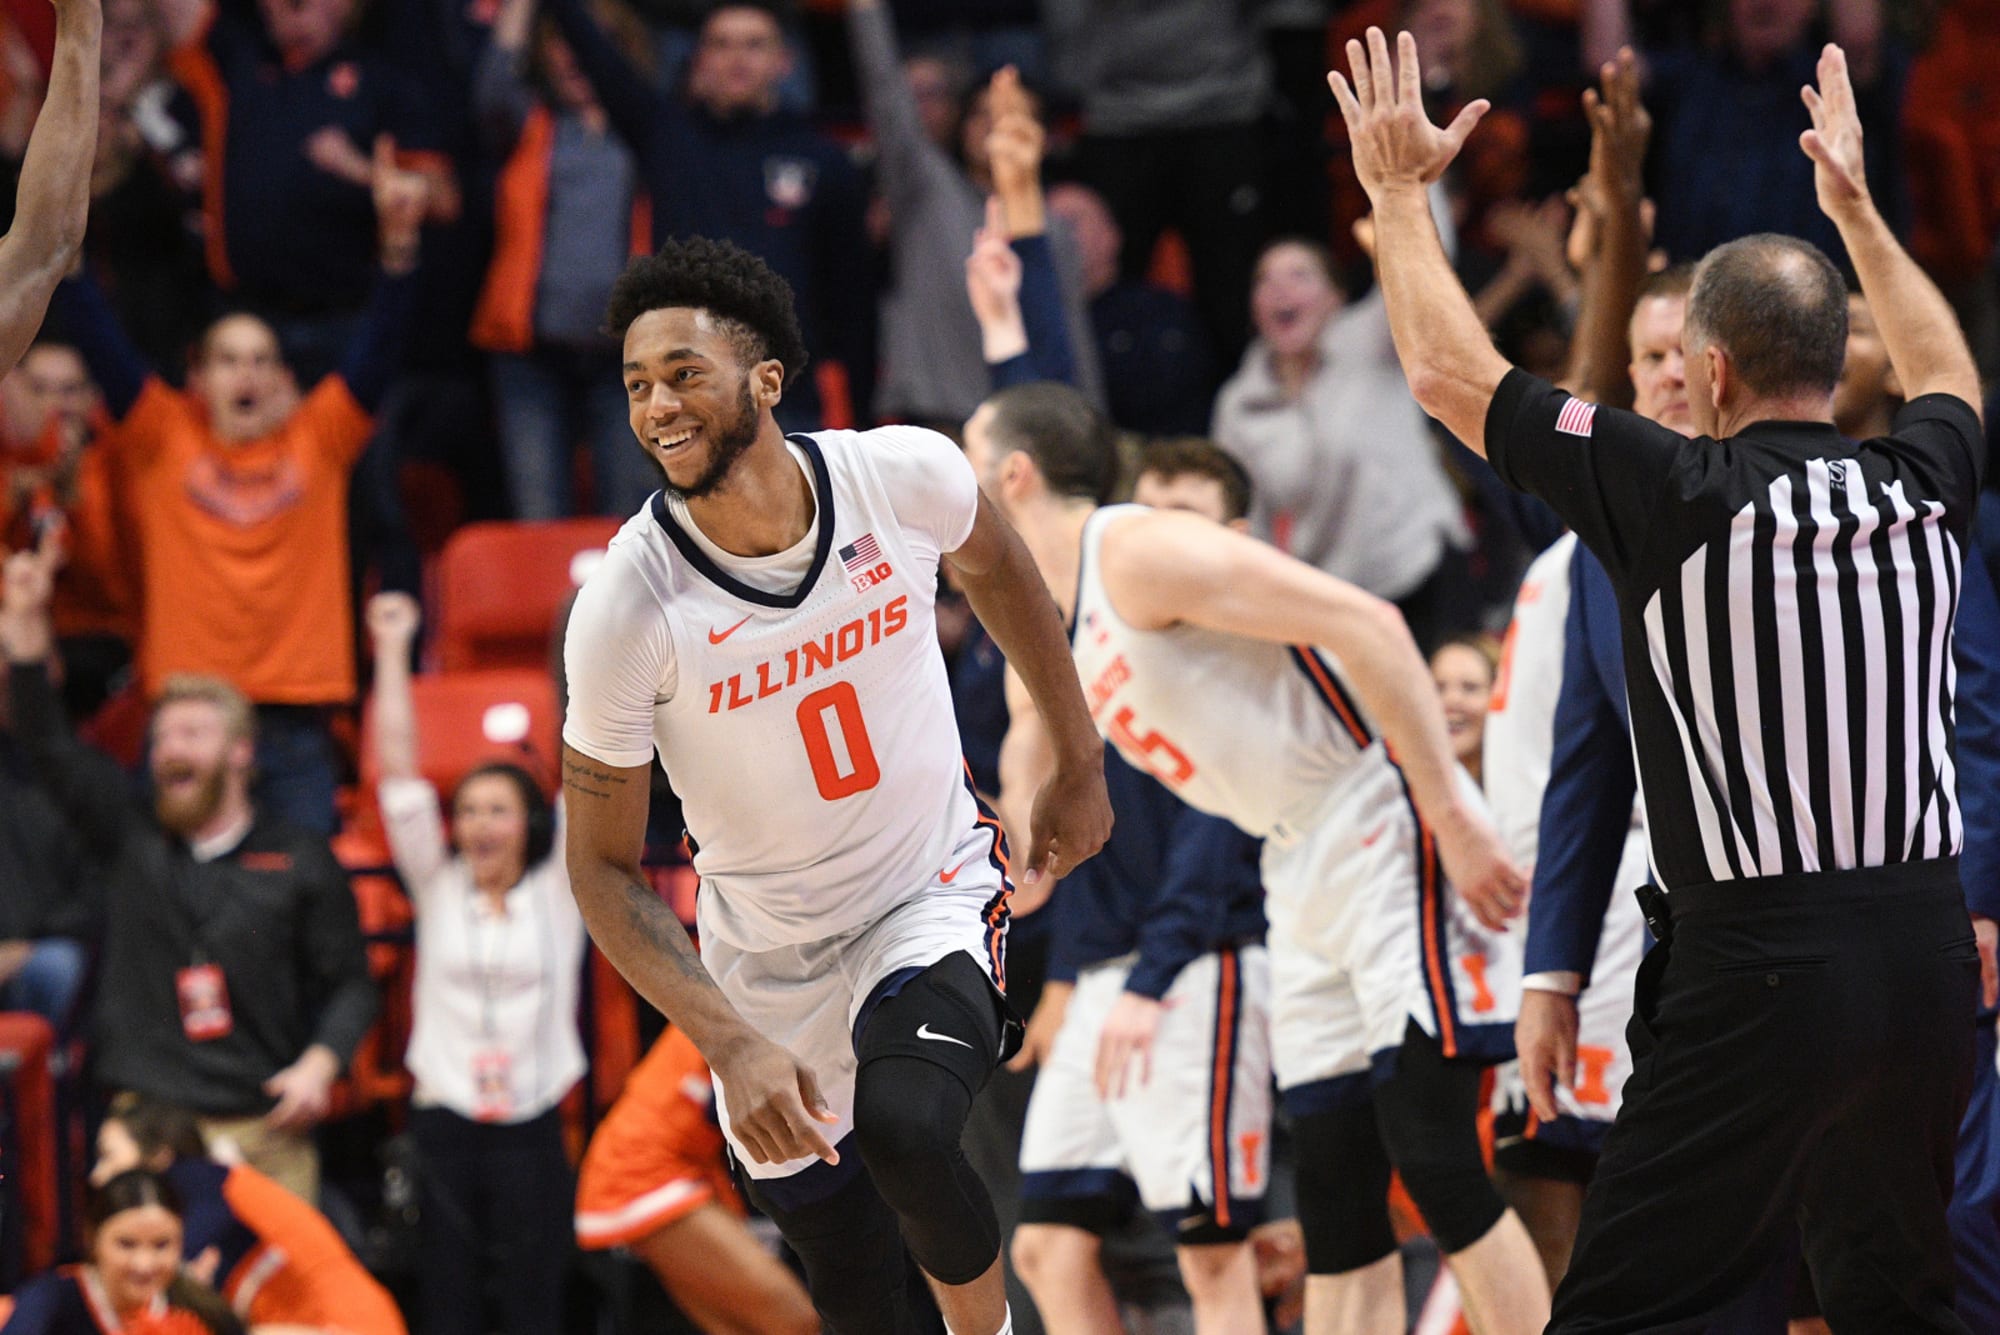 Illinois Basketball The Illini are on the verge of something special